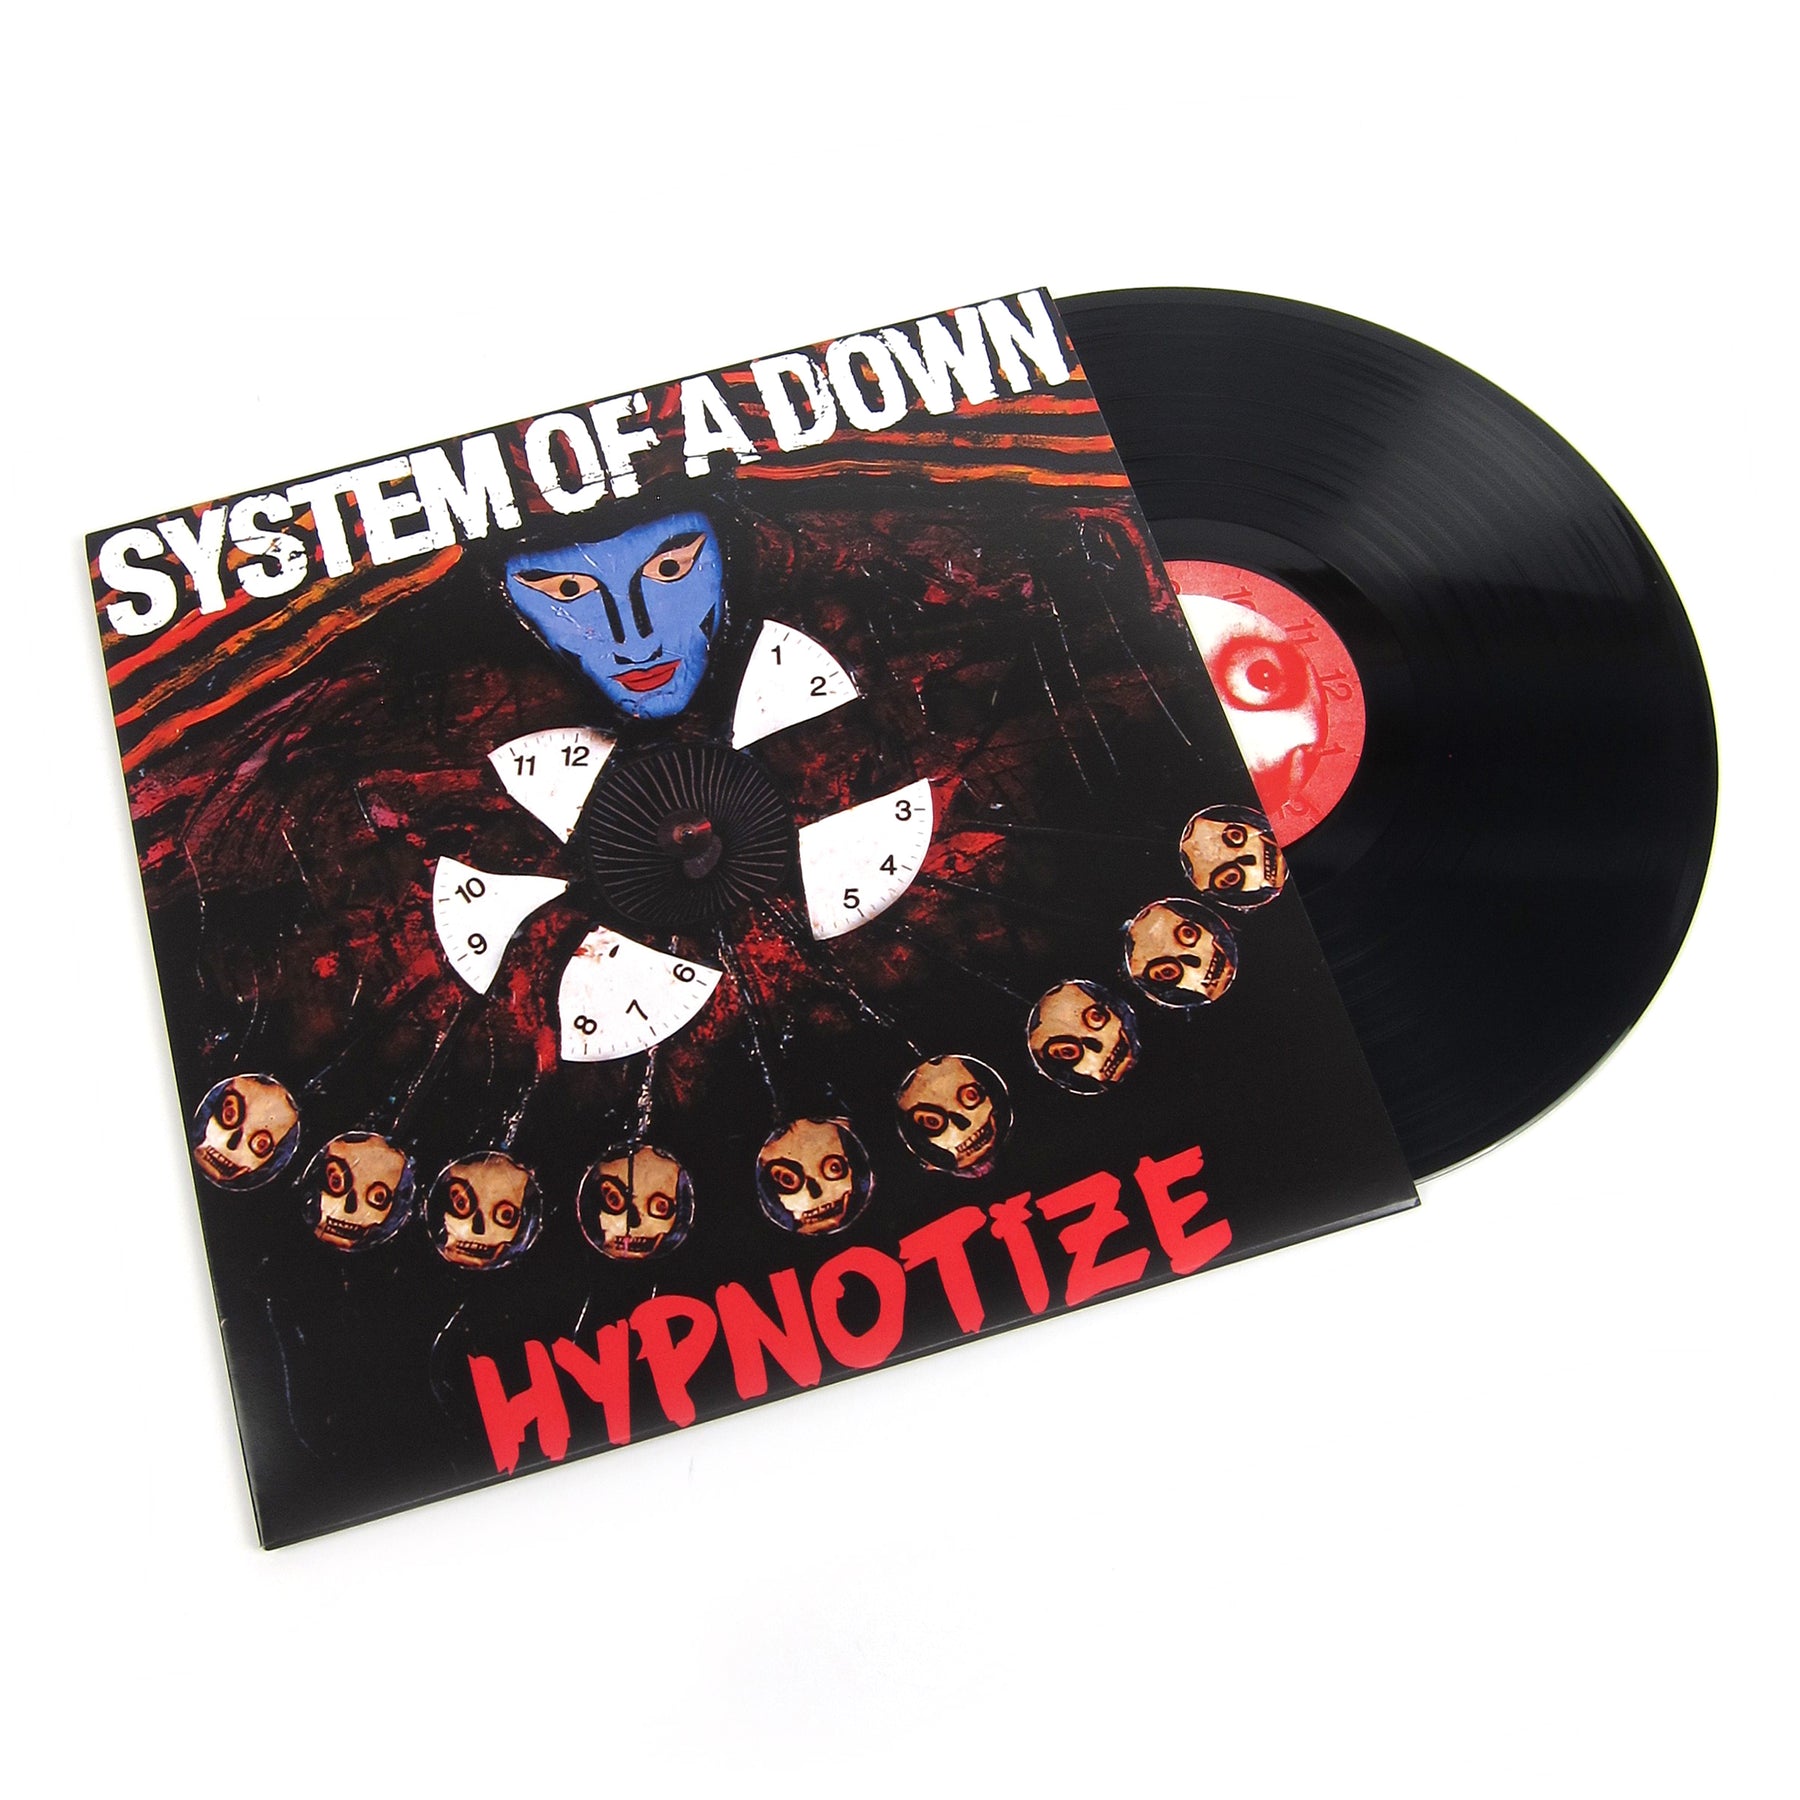 hypnotize system of a down